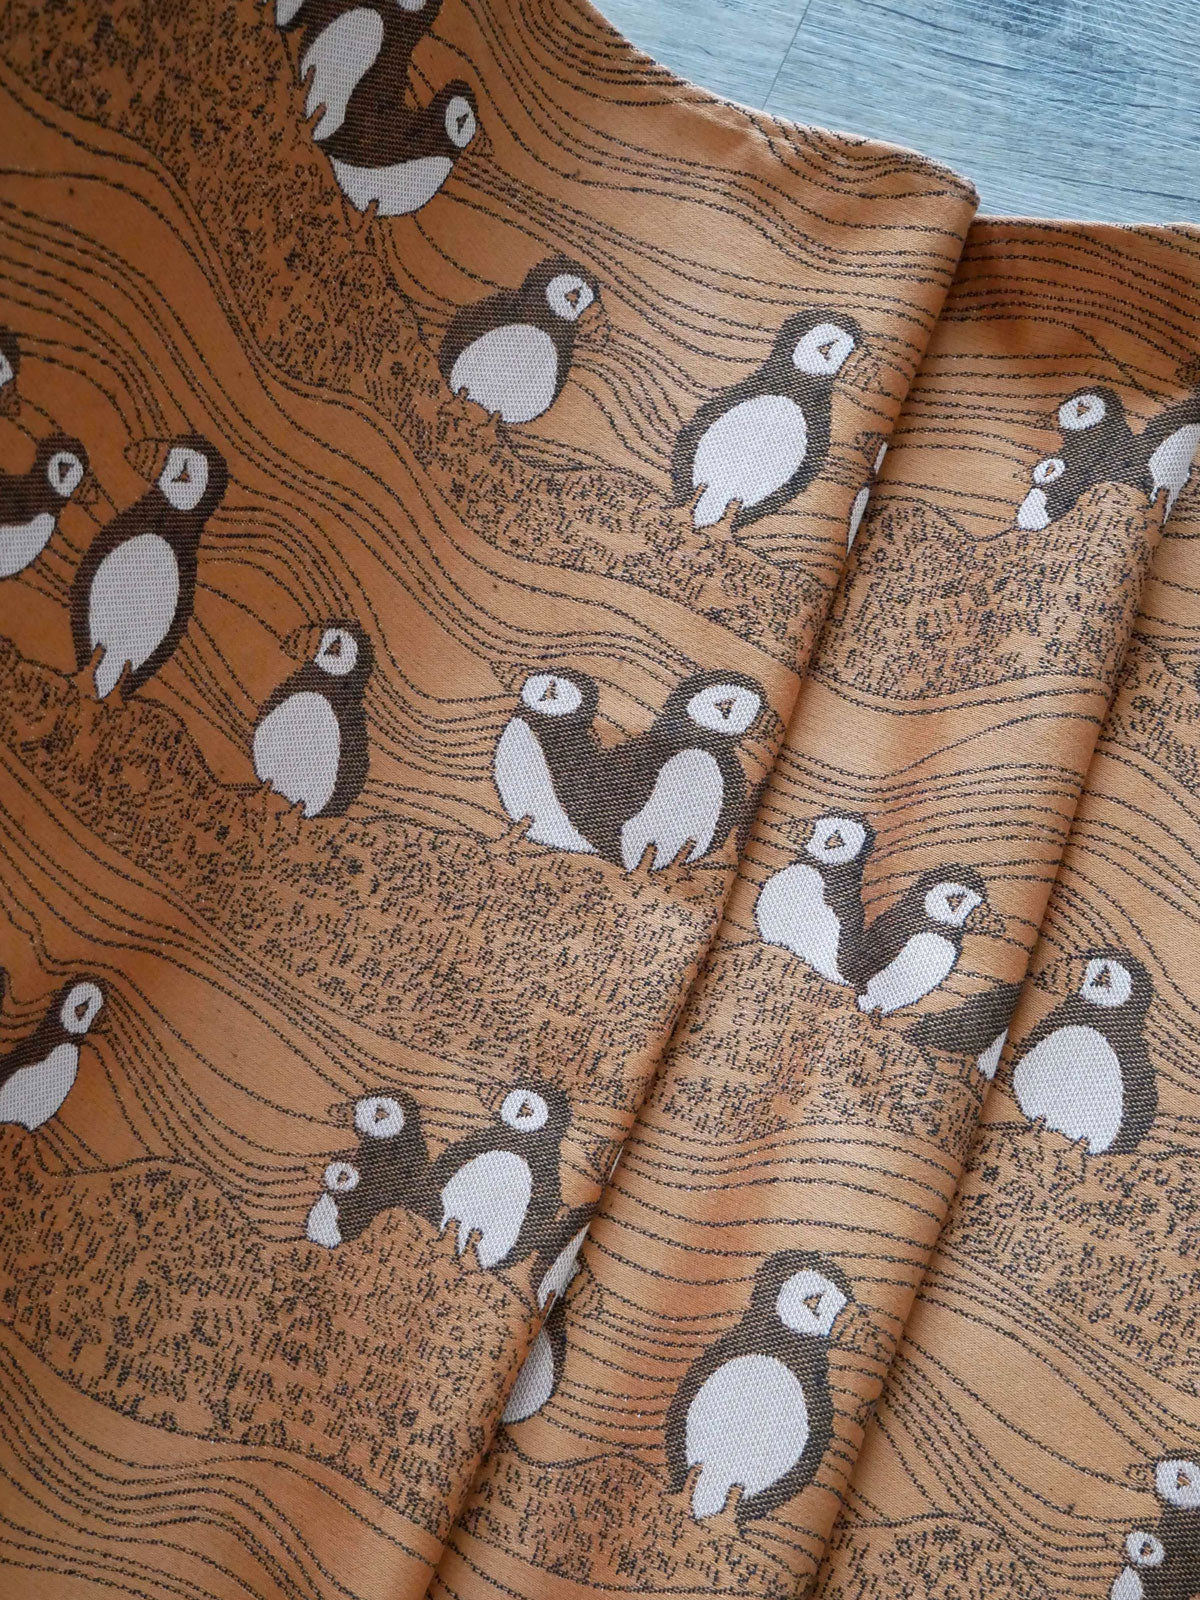 Puffins Hoy Ring Sling